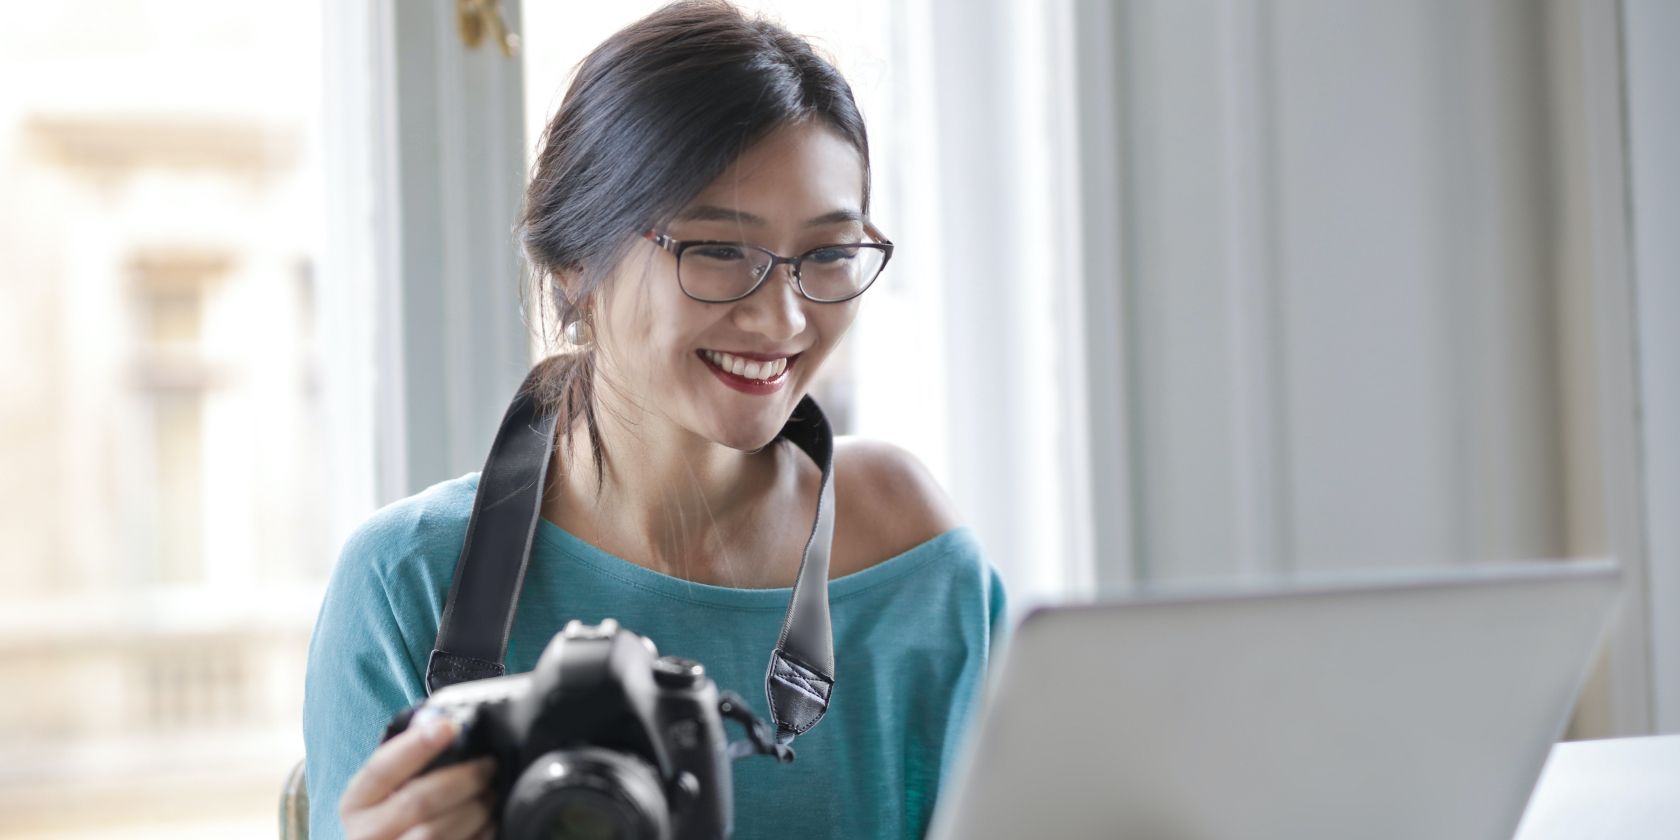 Image shows a woman with a camera smiling at a laptop